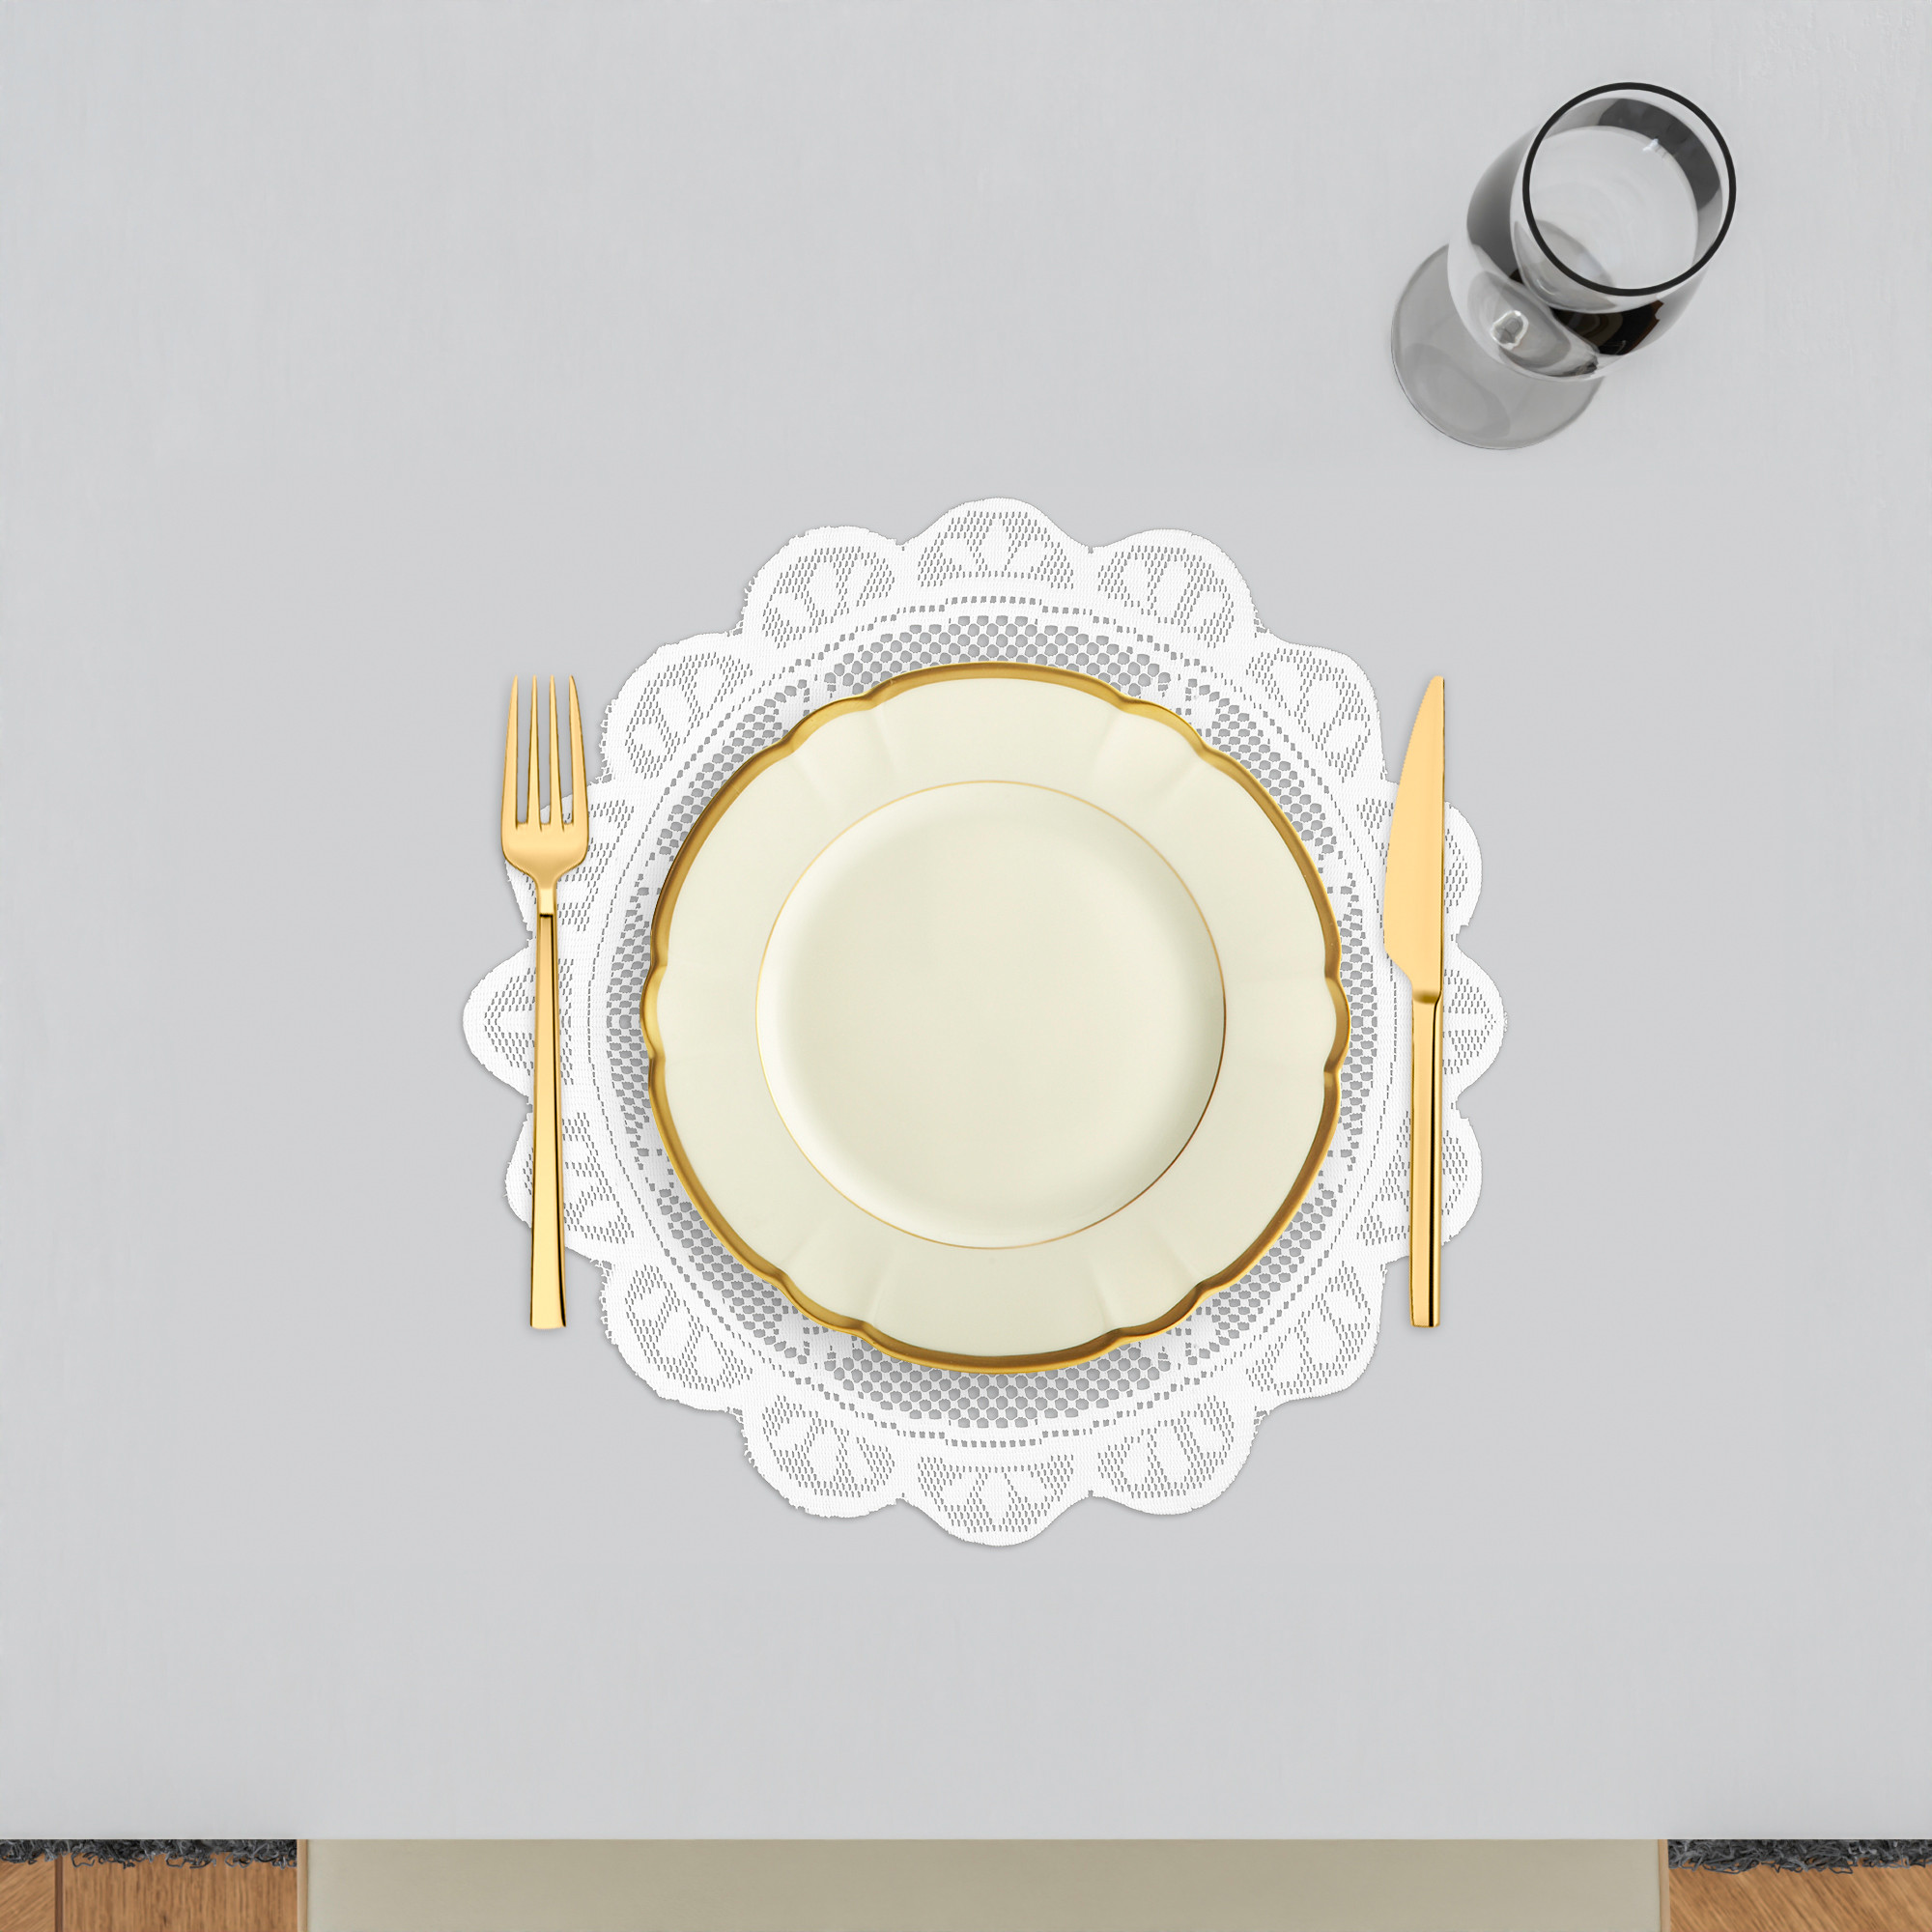 Kuber Industries Placemat | Dining Table Placemat | Center Table Mats | Round Plain Net Placemat Set | Side Table Placemats for Hotel-Home Décor | 20 Inch |White